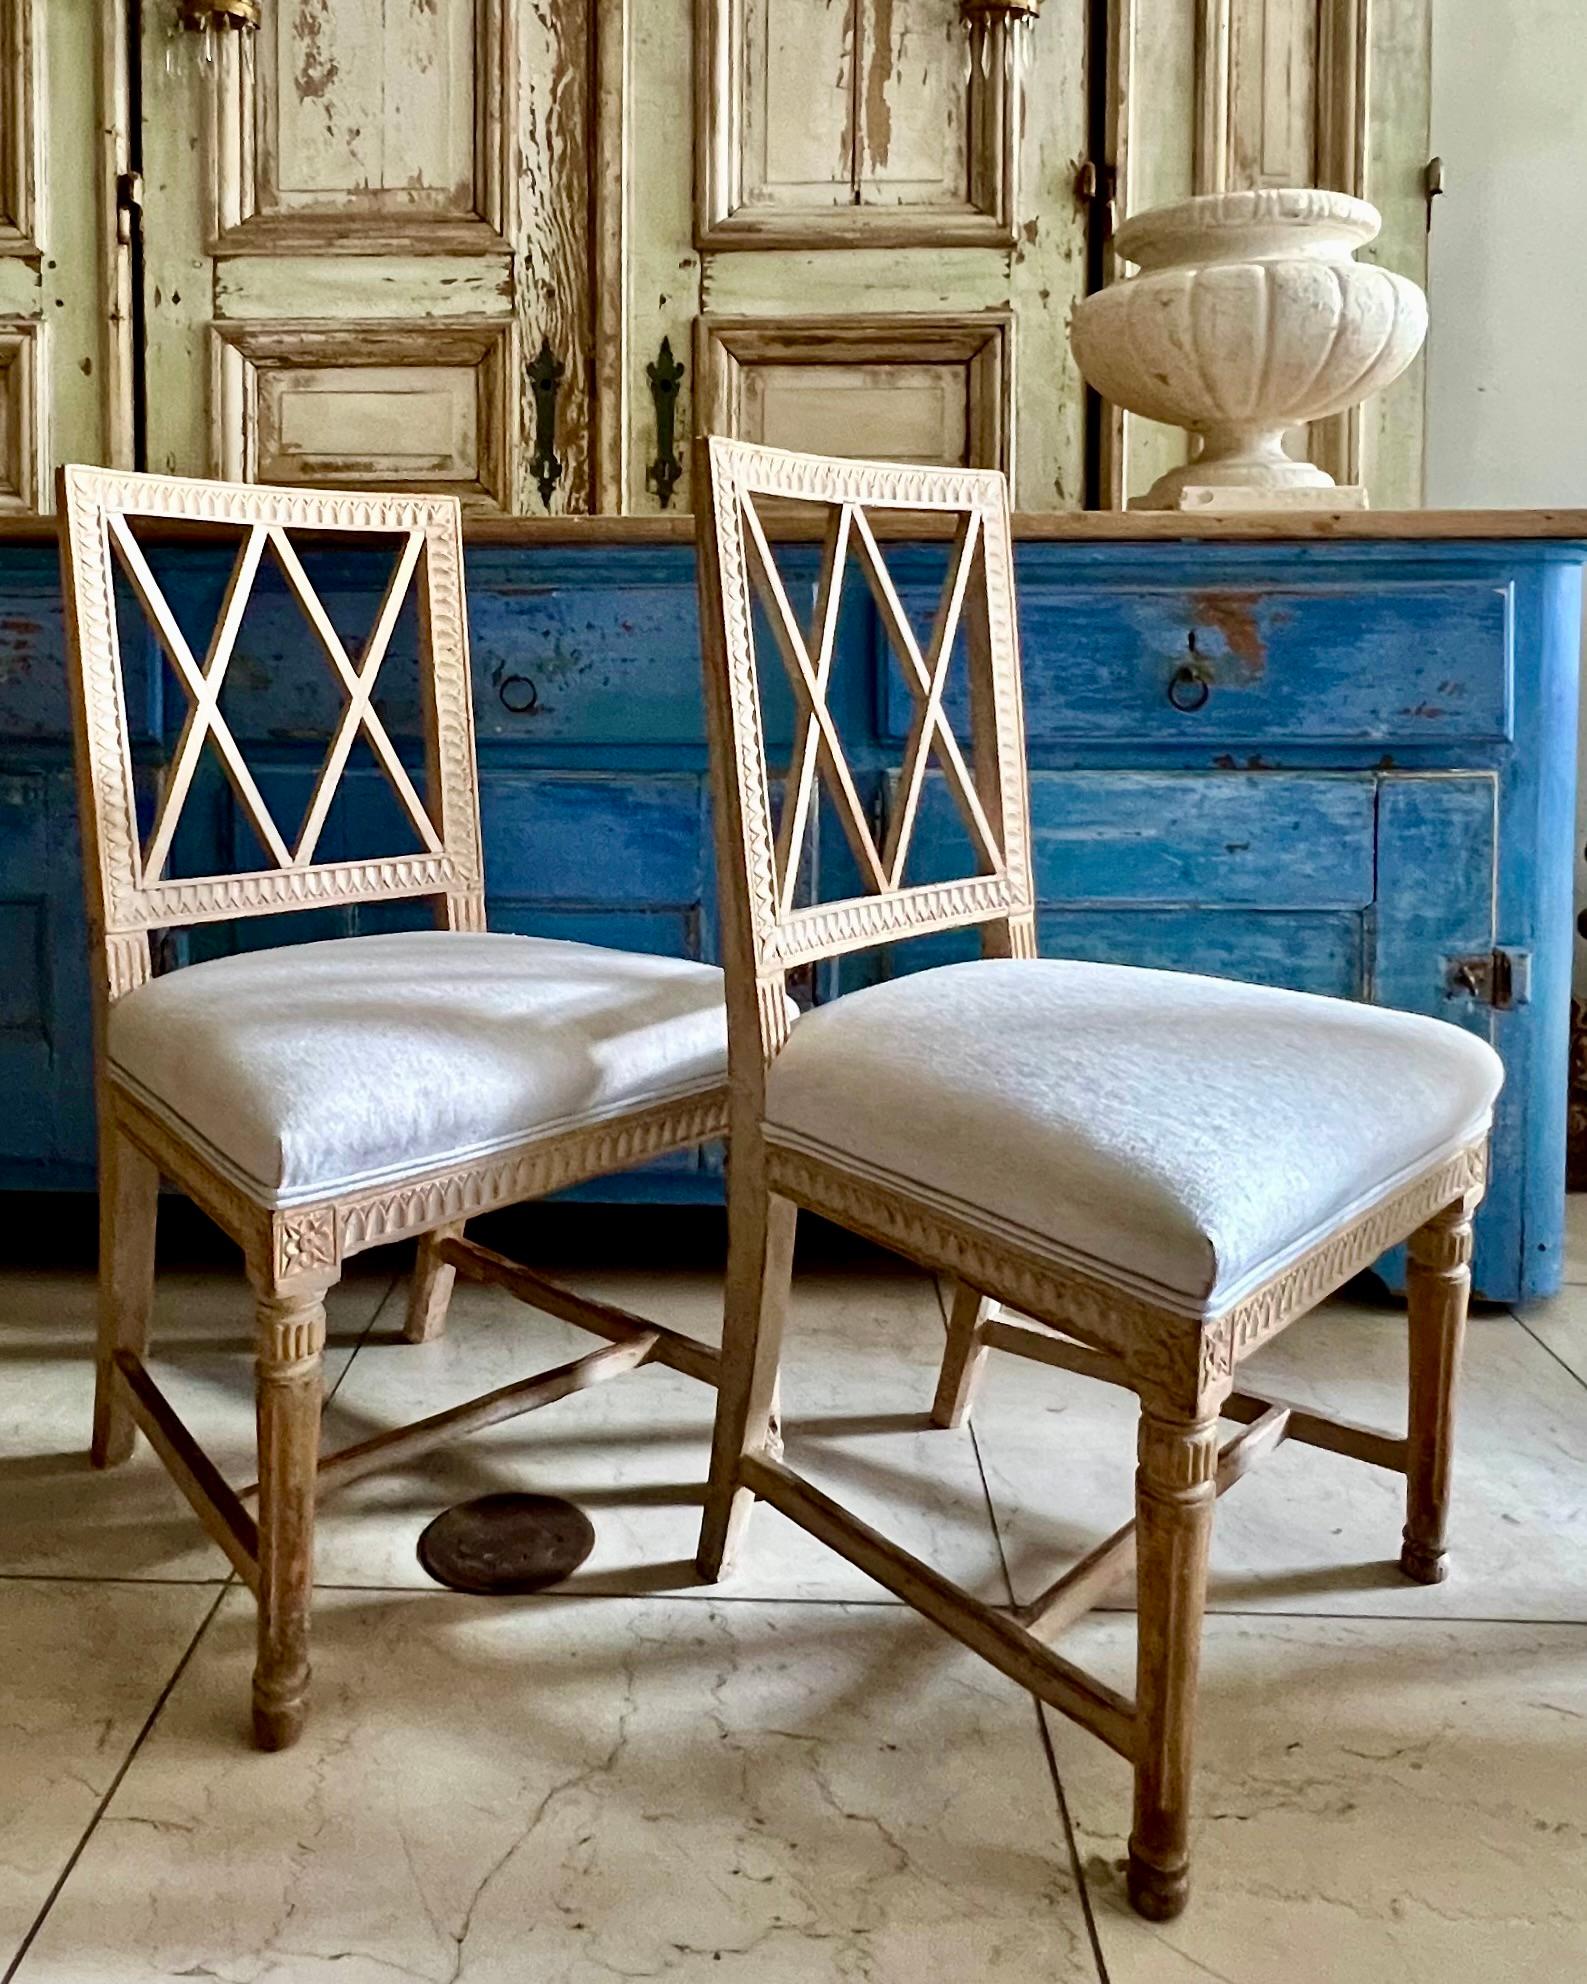 Pair of Swedish Gustavian Lindome chairs early 1800s with regtangular shaped back surranded by criss-cross pierced splats and frames carved in classic Gustavian motifs.
Hand scraped to its most original color with some remants showing.
Upholstered